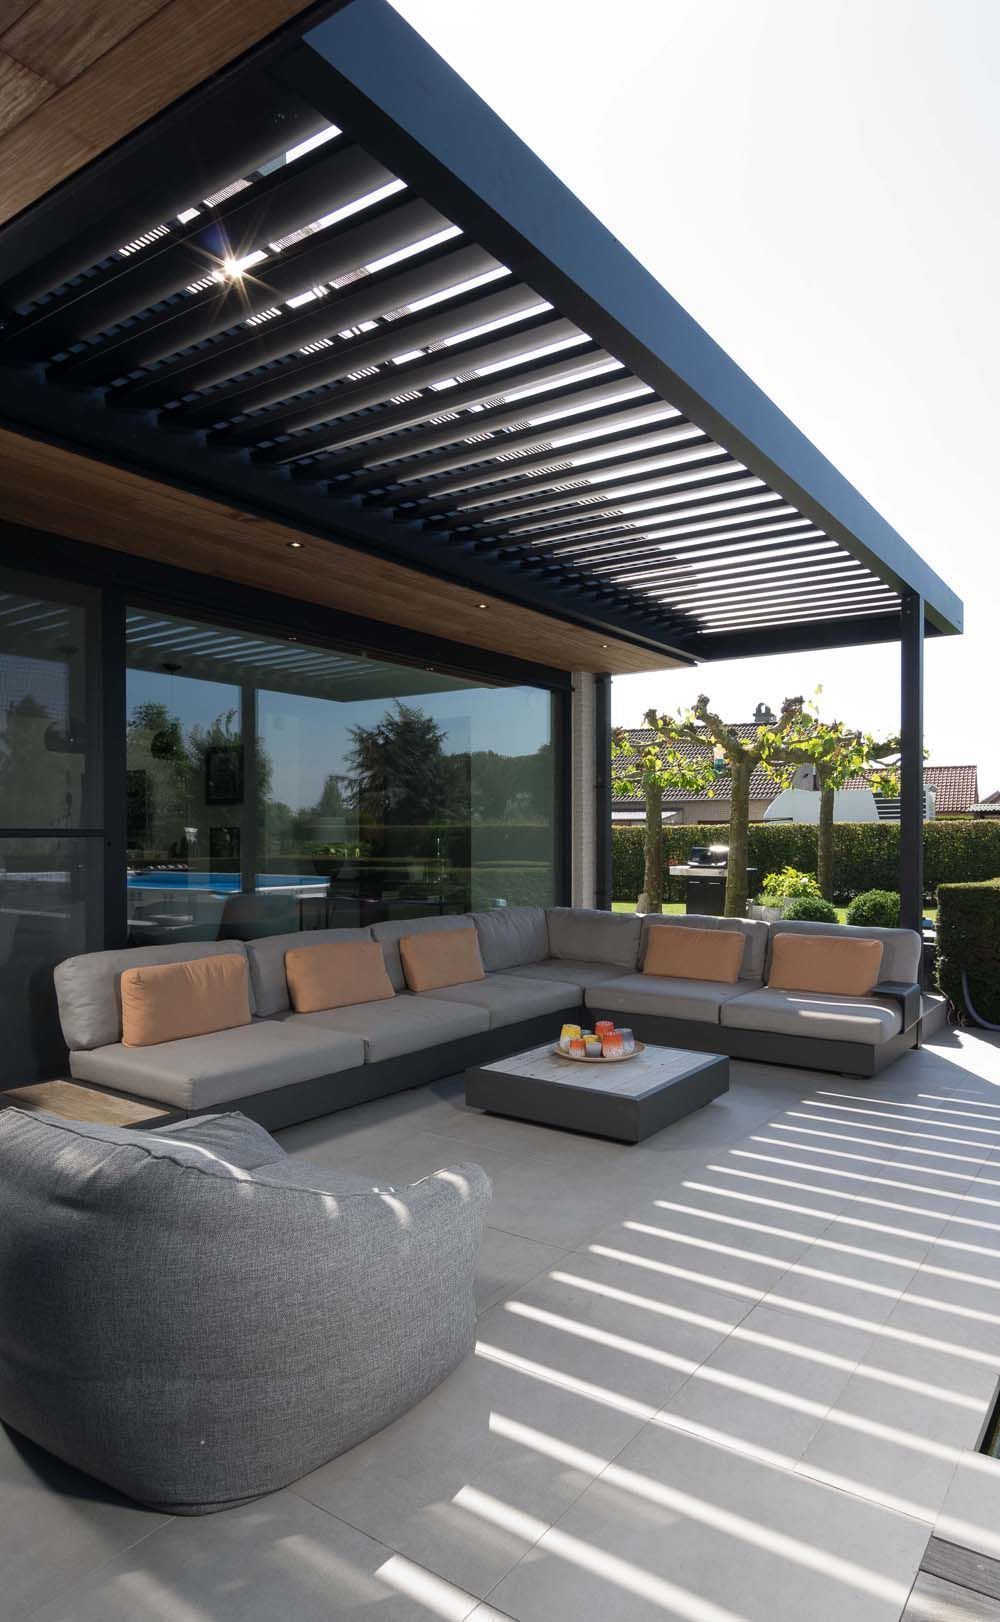 Top Outdoor Lounge Furniture for
Maximizing Your Outdoor Space